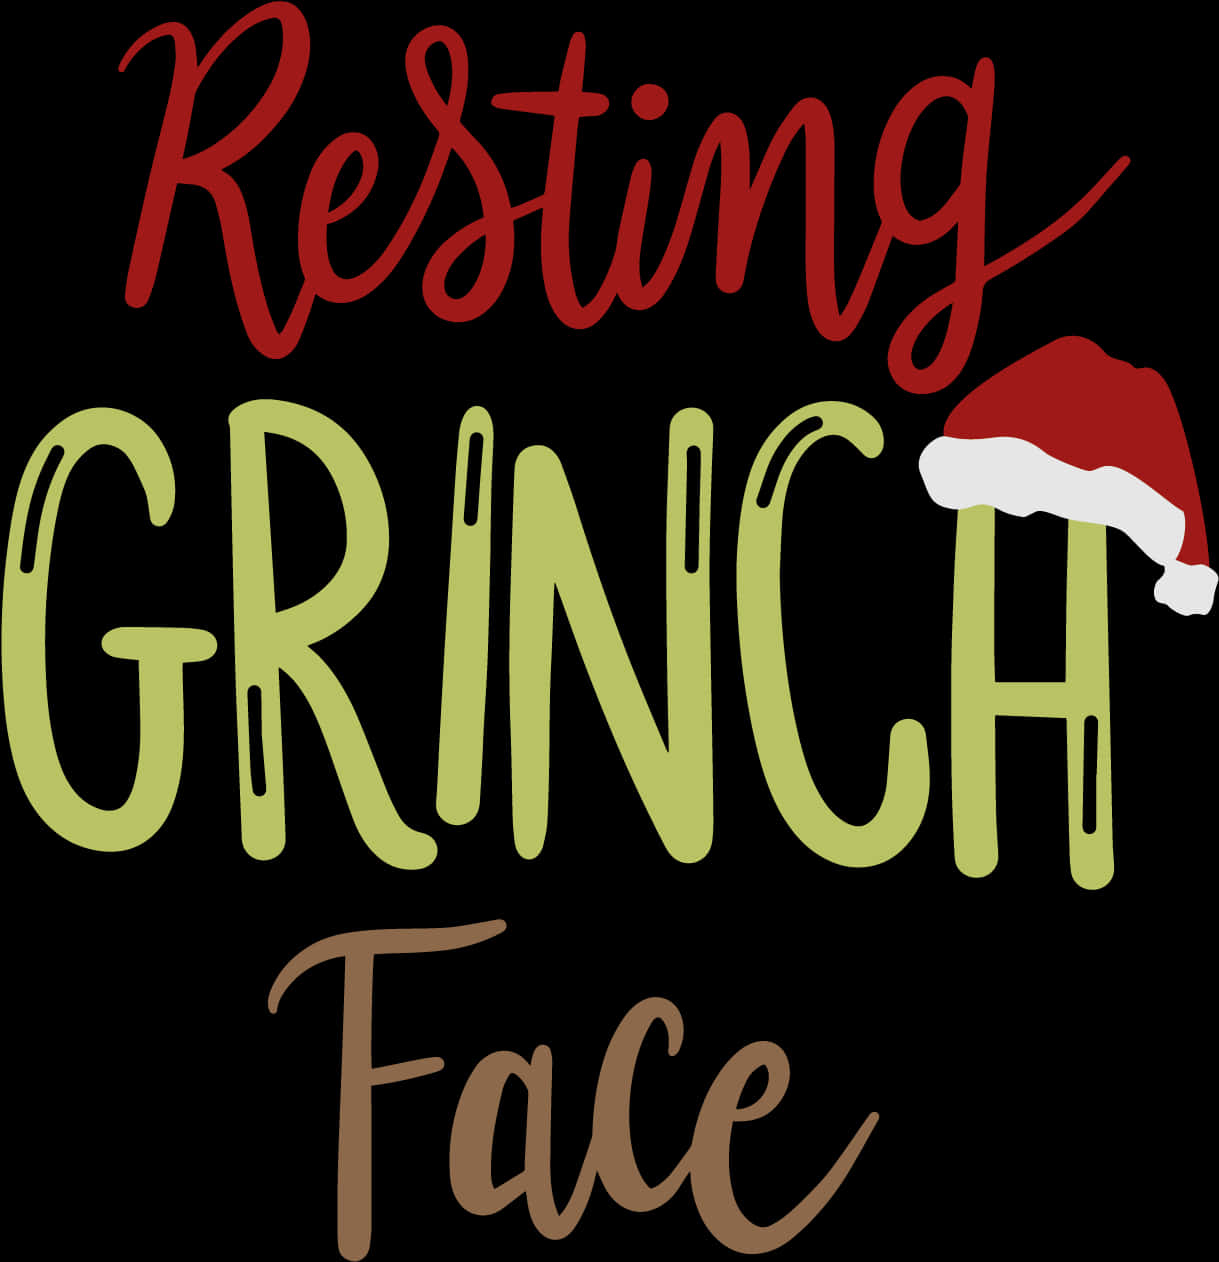 Resting Grinch Face Holiday Graphic PNG